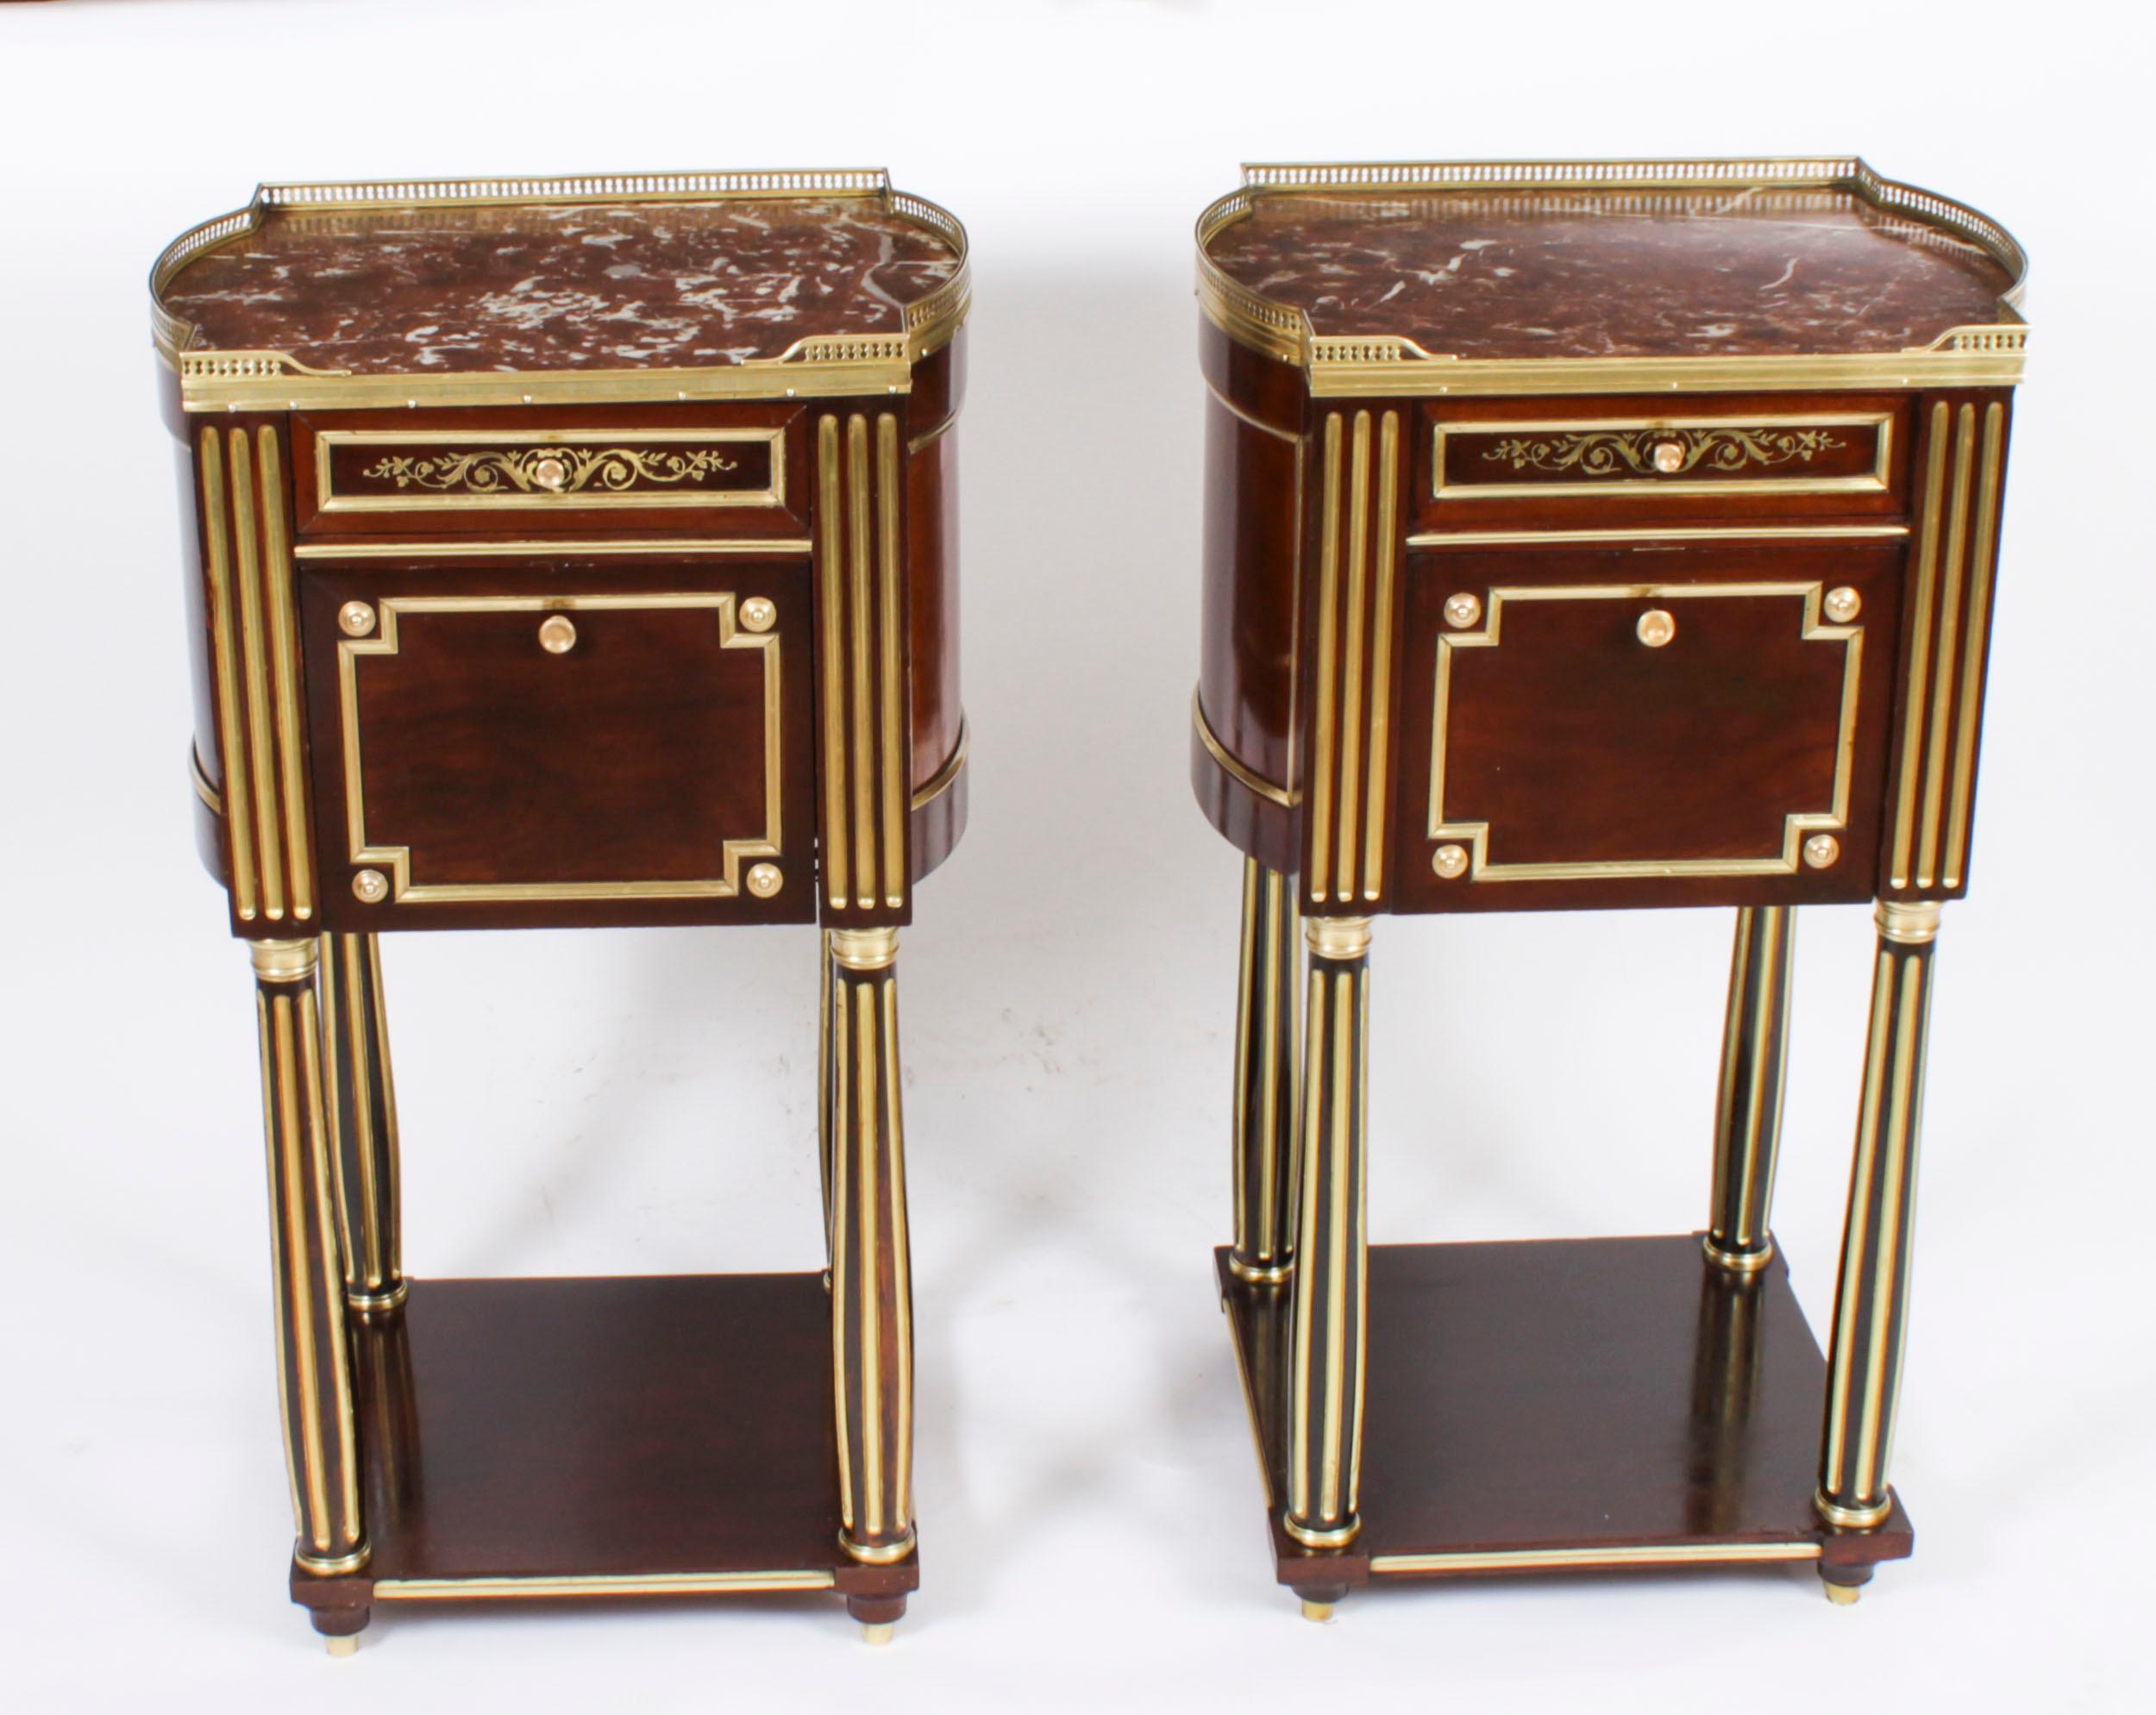 A thoroughly delightful pair of antique French Empire brass inlaid flame mahogany bedside cabinets, circa 1830 in date.

They are freestanding and finished on all four sides. They each feature bombe' sides and shaped rectangular mottled Rouge de